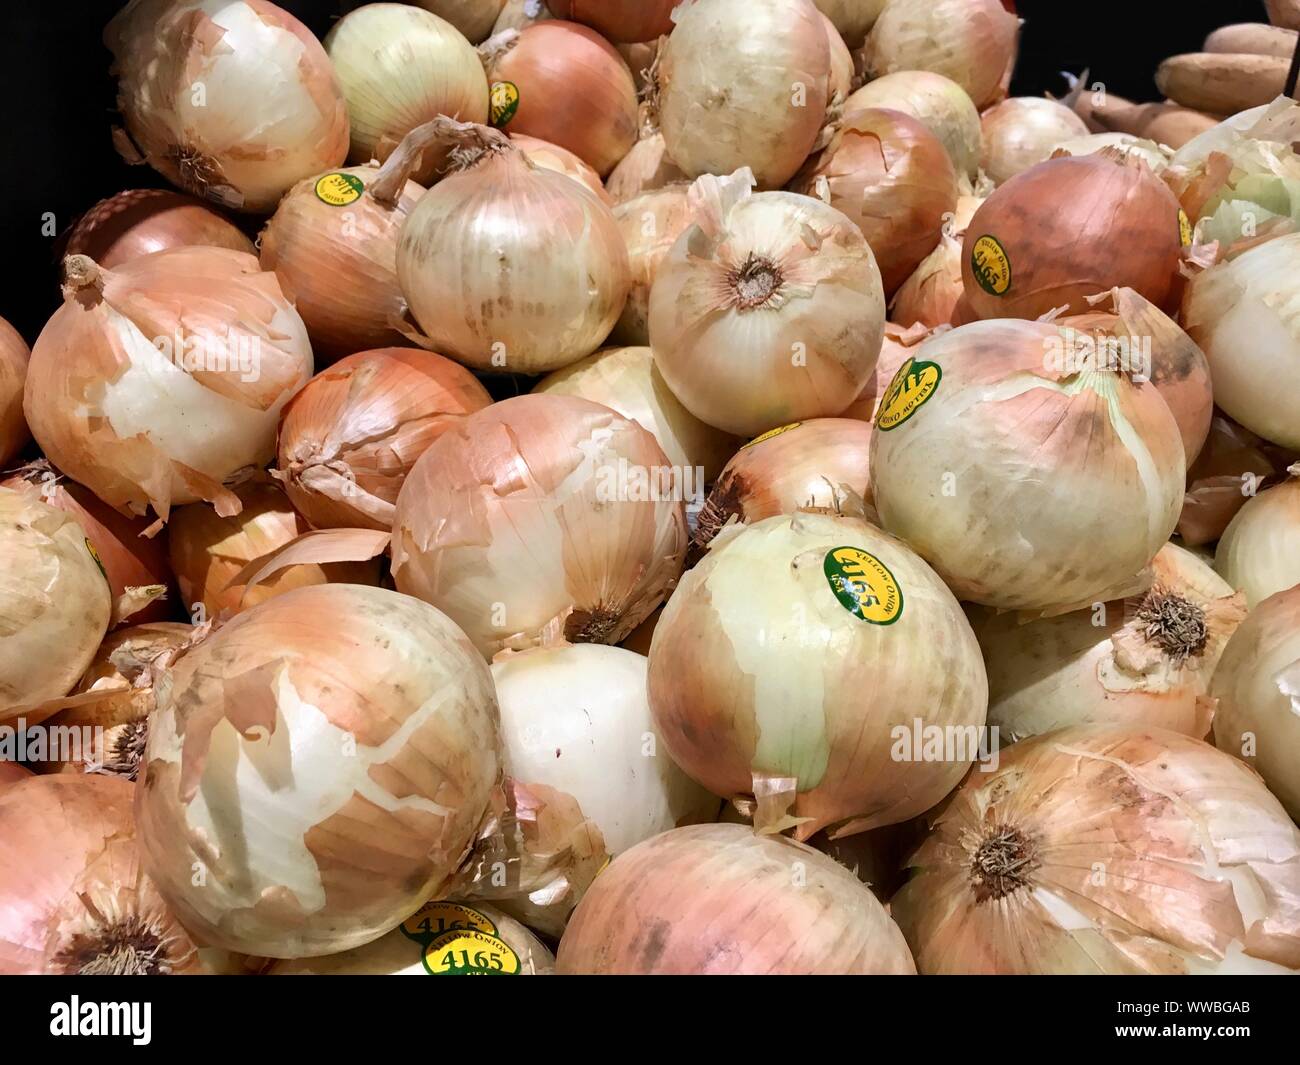 yellow onions on display at a market Stock Photo